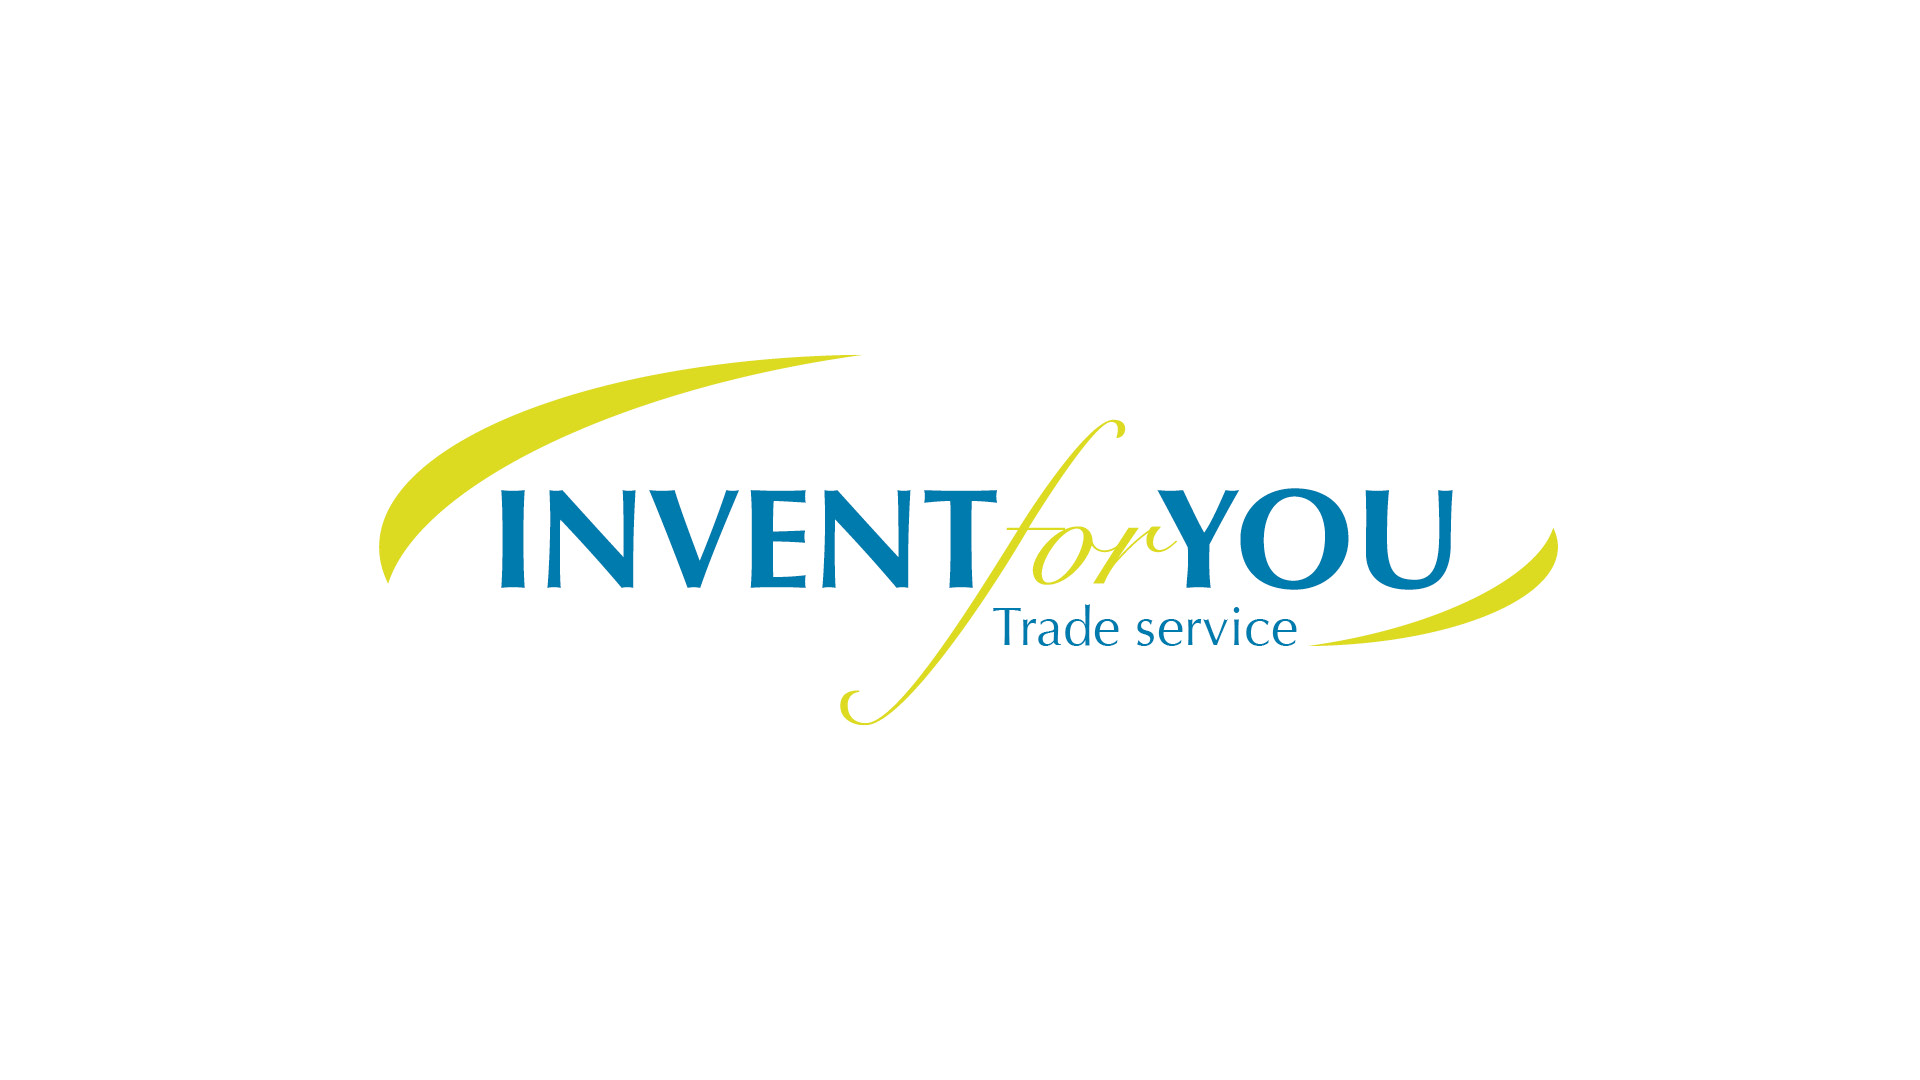 Invent for you